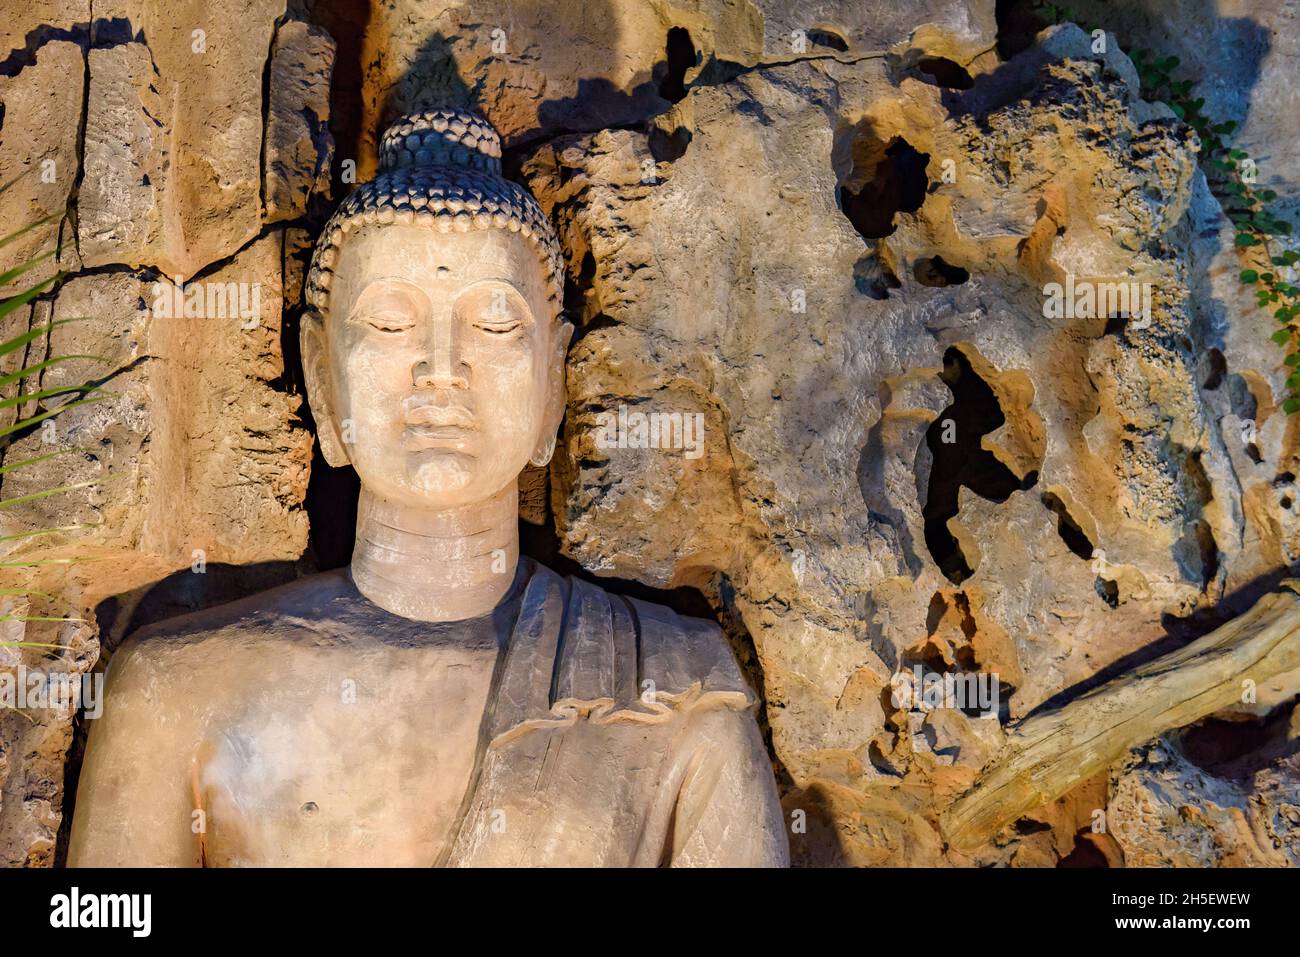 Closeup of stone Buddha statue carved into cave wall. Stock Photo